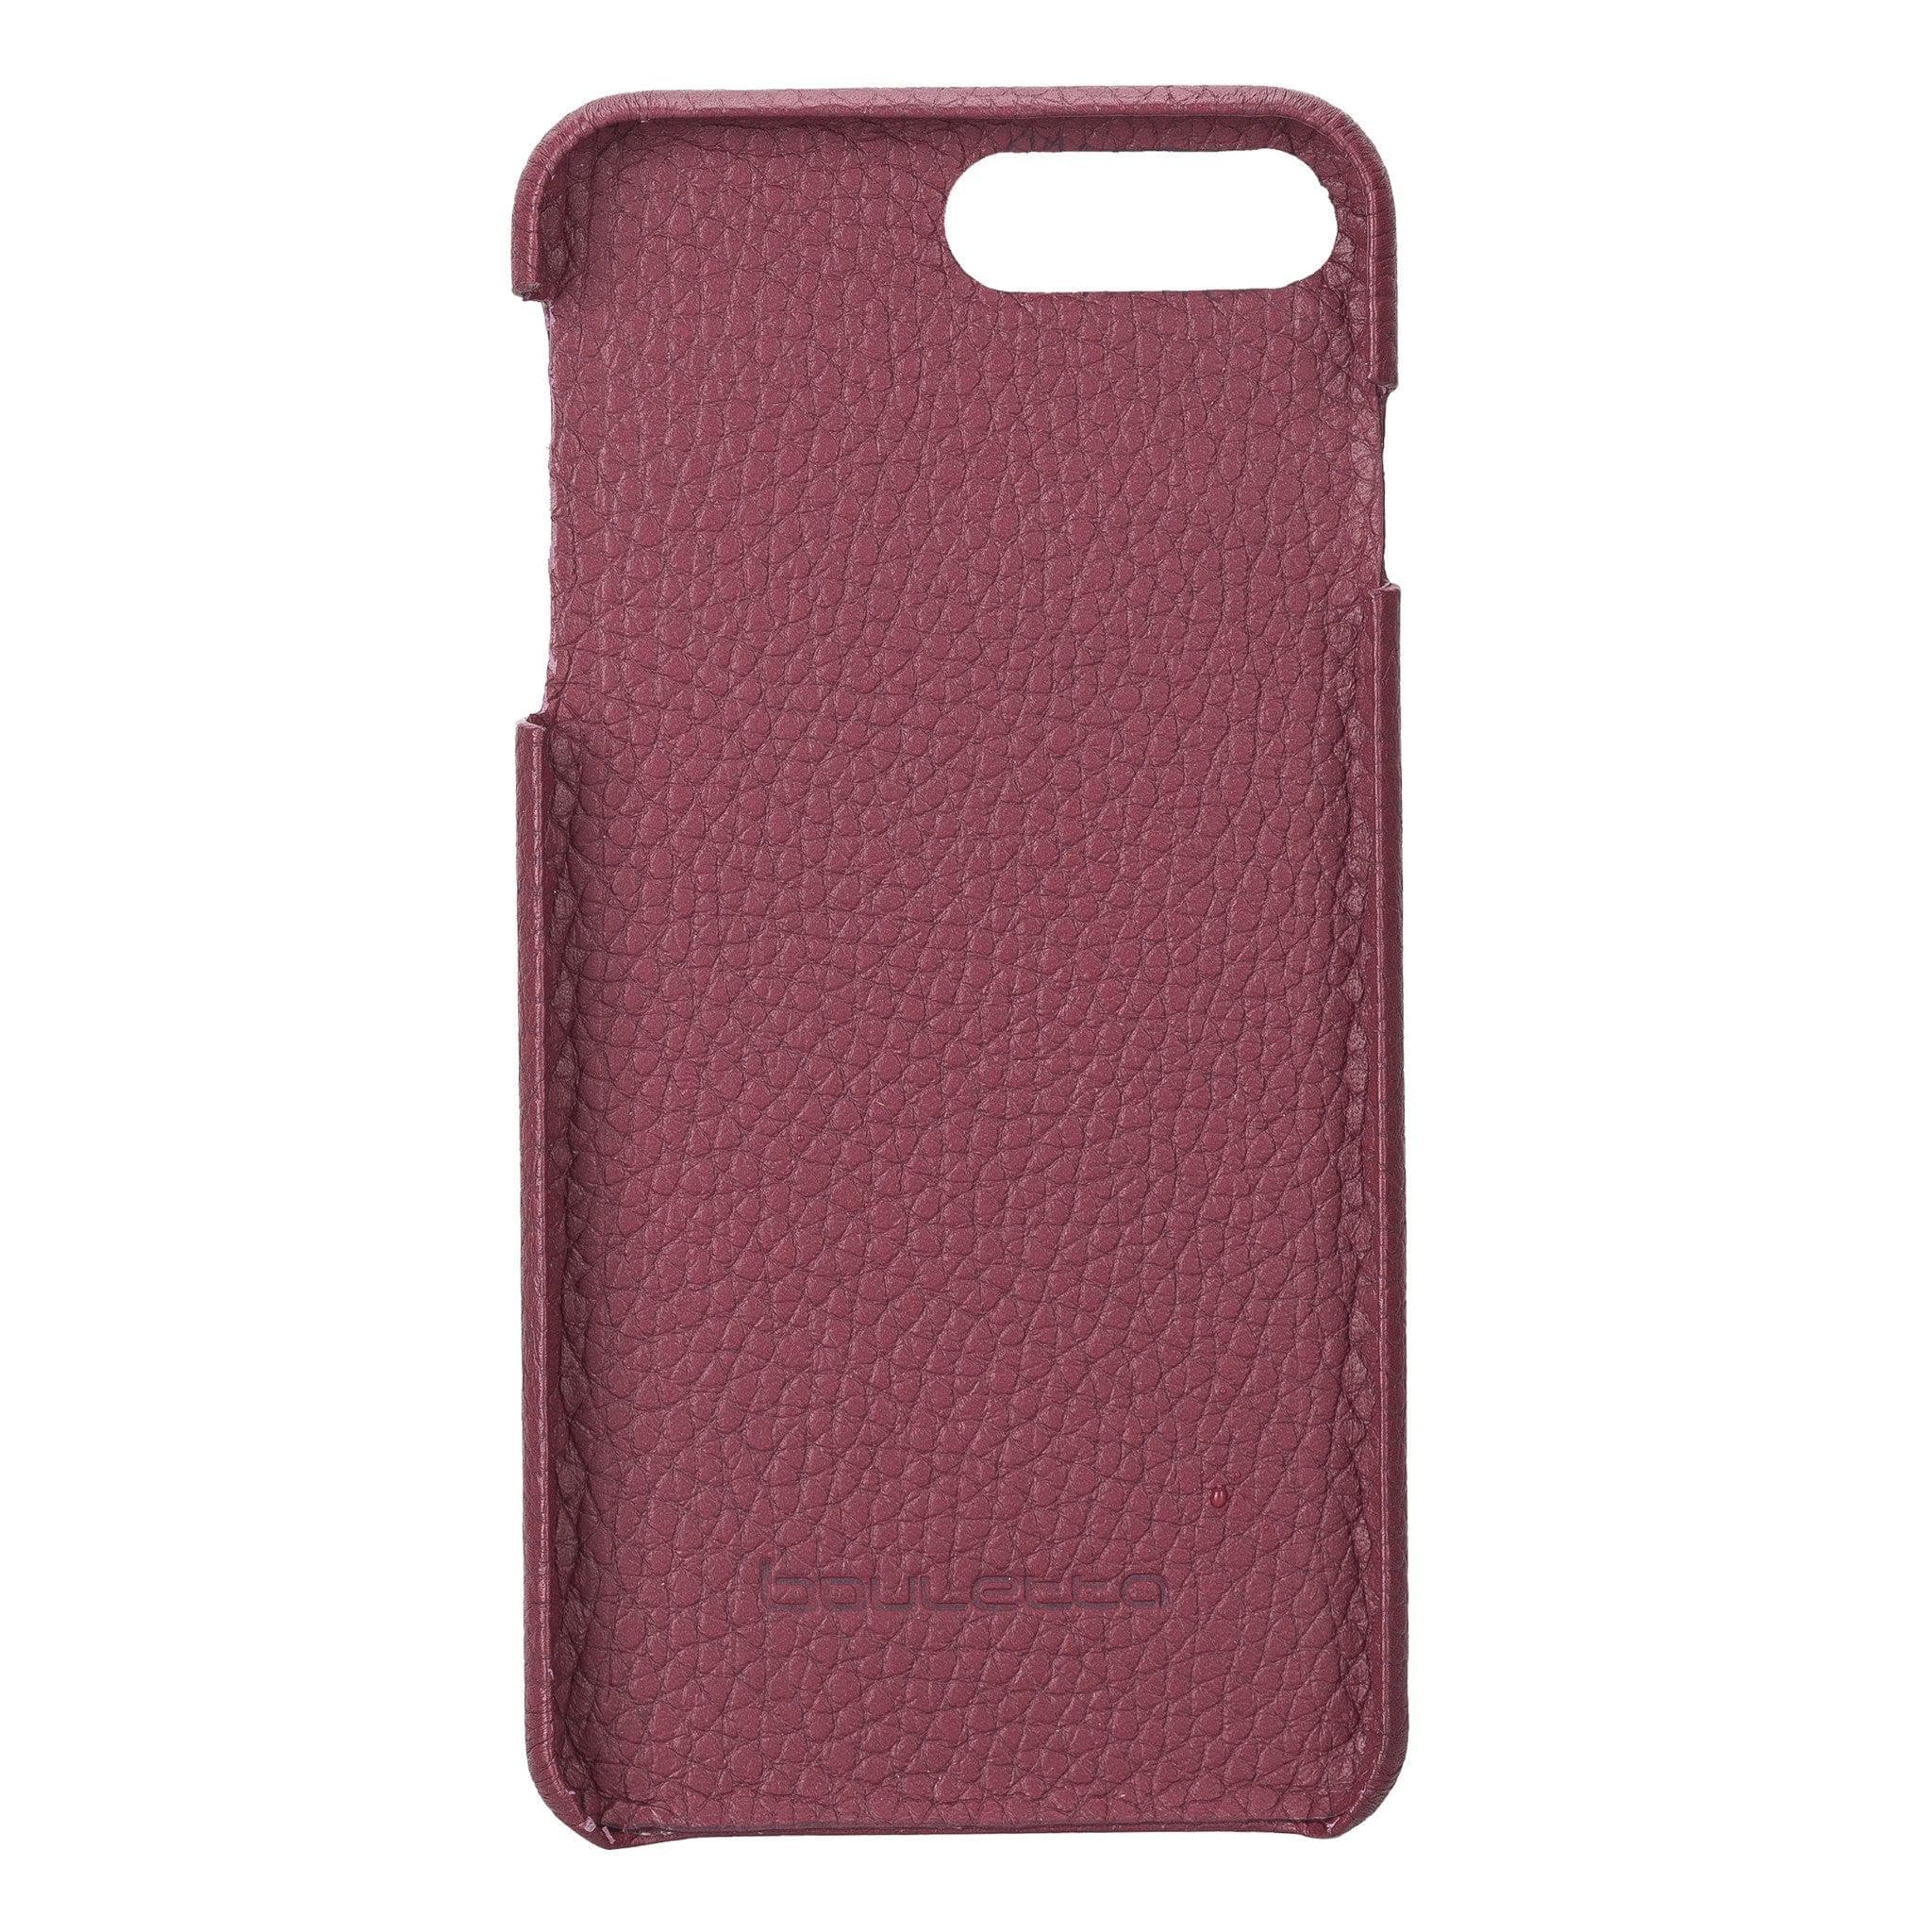 Apple iPhone 7 Series Fully Covering Leather Back Cover Case Bouletta LTD